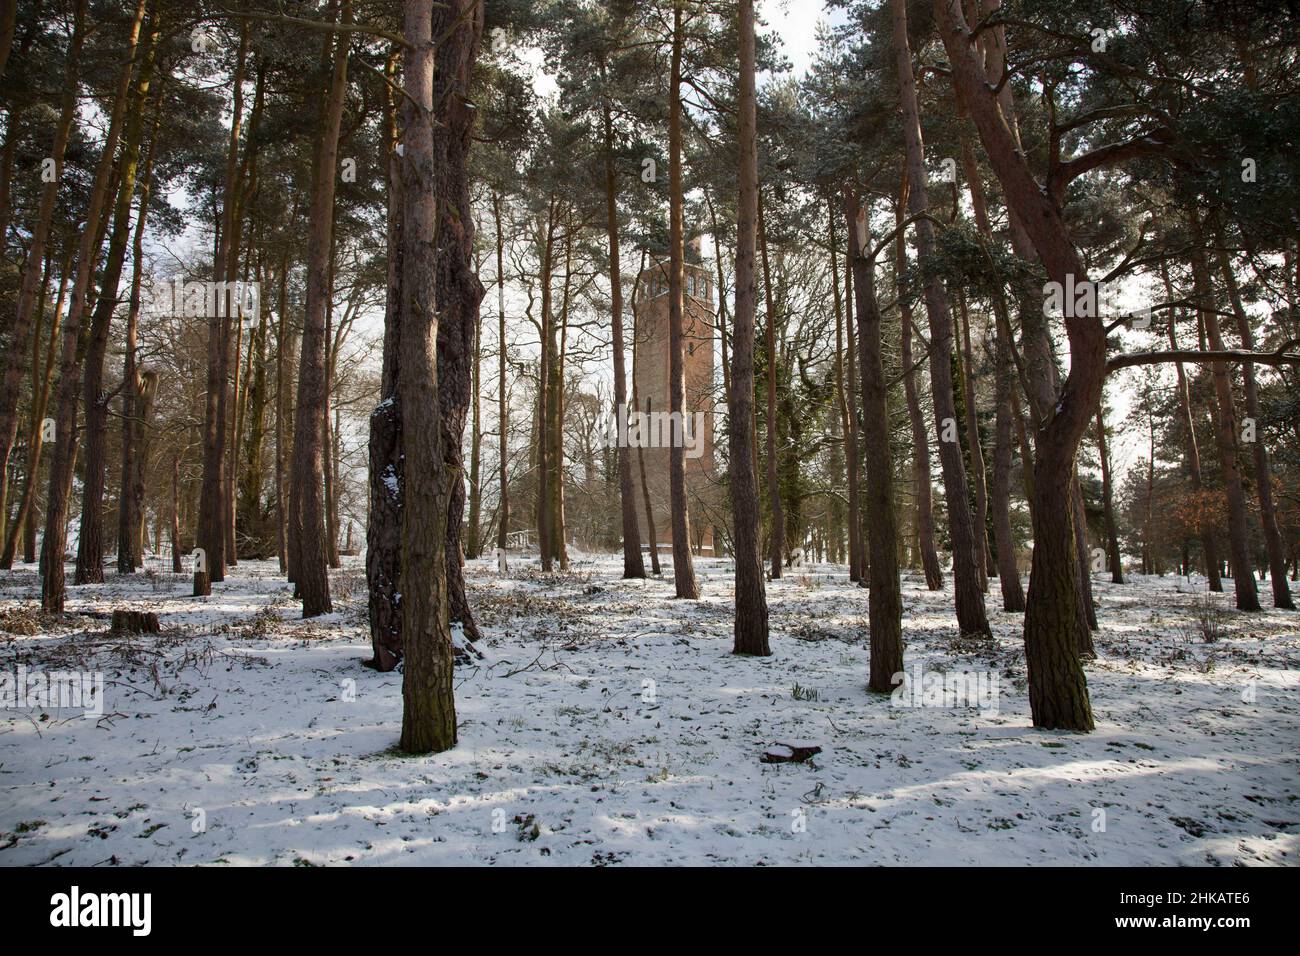 A winter's image of Faringdon Folly, hidden behind pine trees, with a layer of snow covering the ground Stock Photo